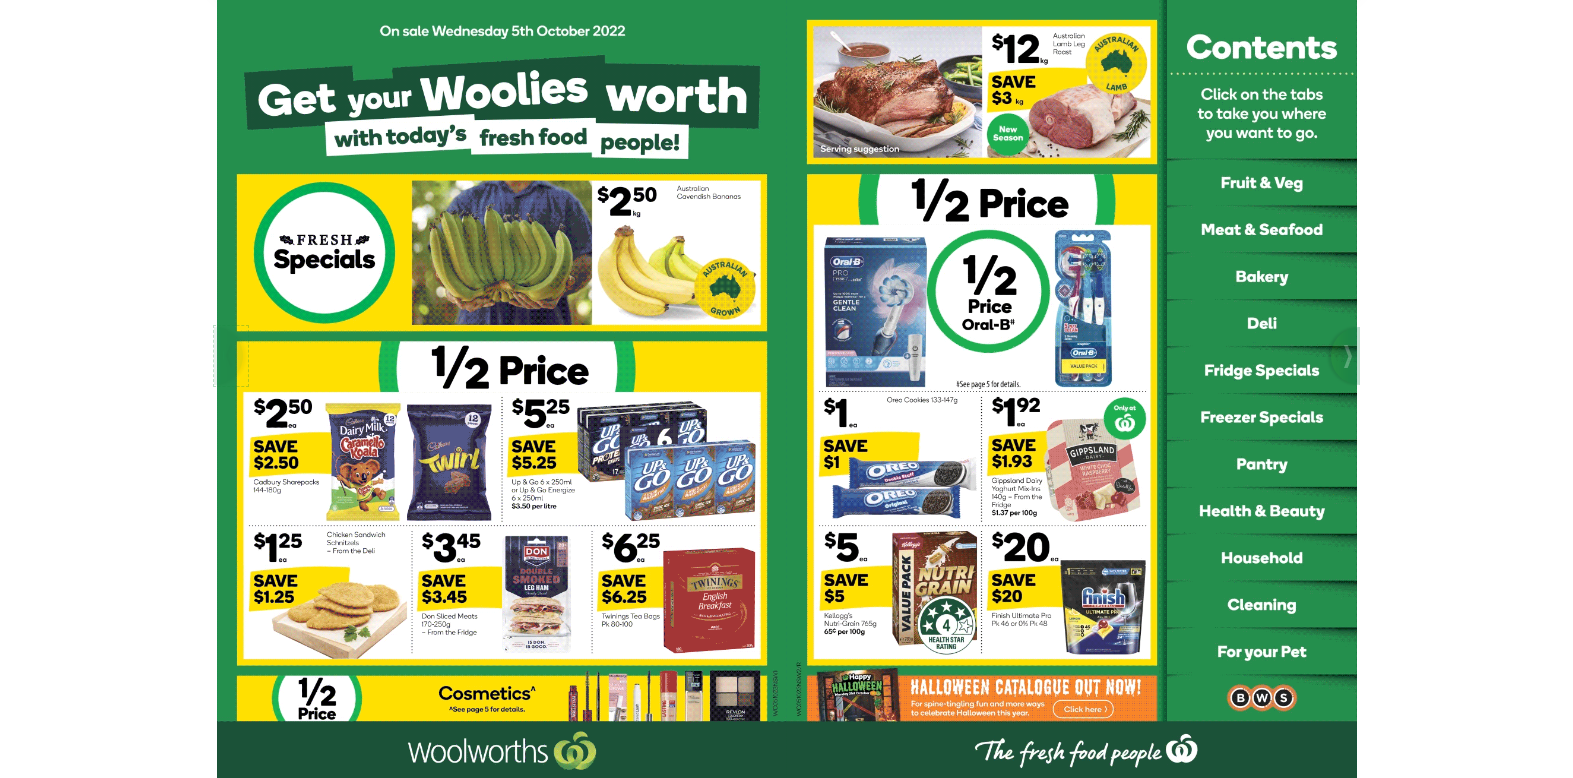 Woolworths Weekly specials - Up to 50% OFF drinks, snacks, groceries & more & more [till 11th Oct]